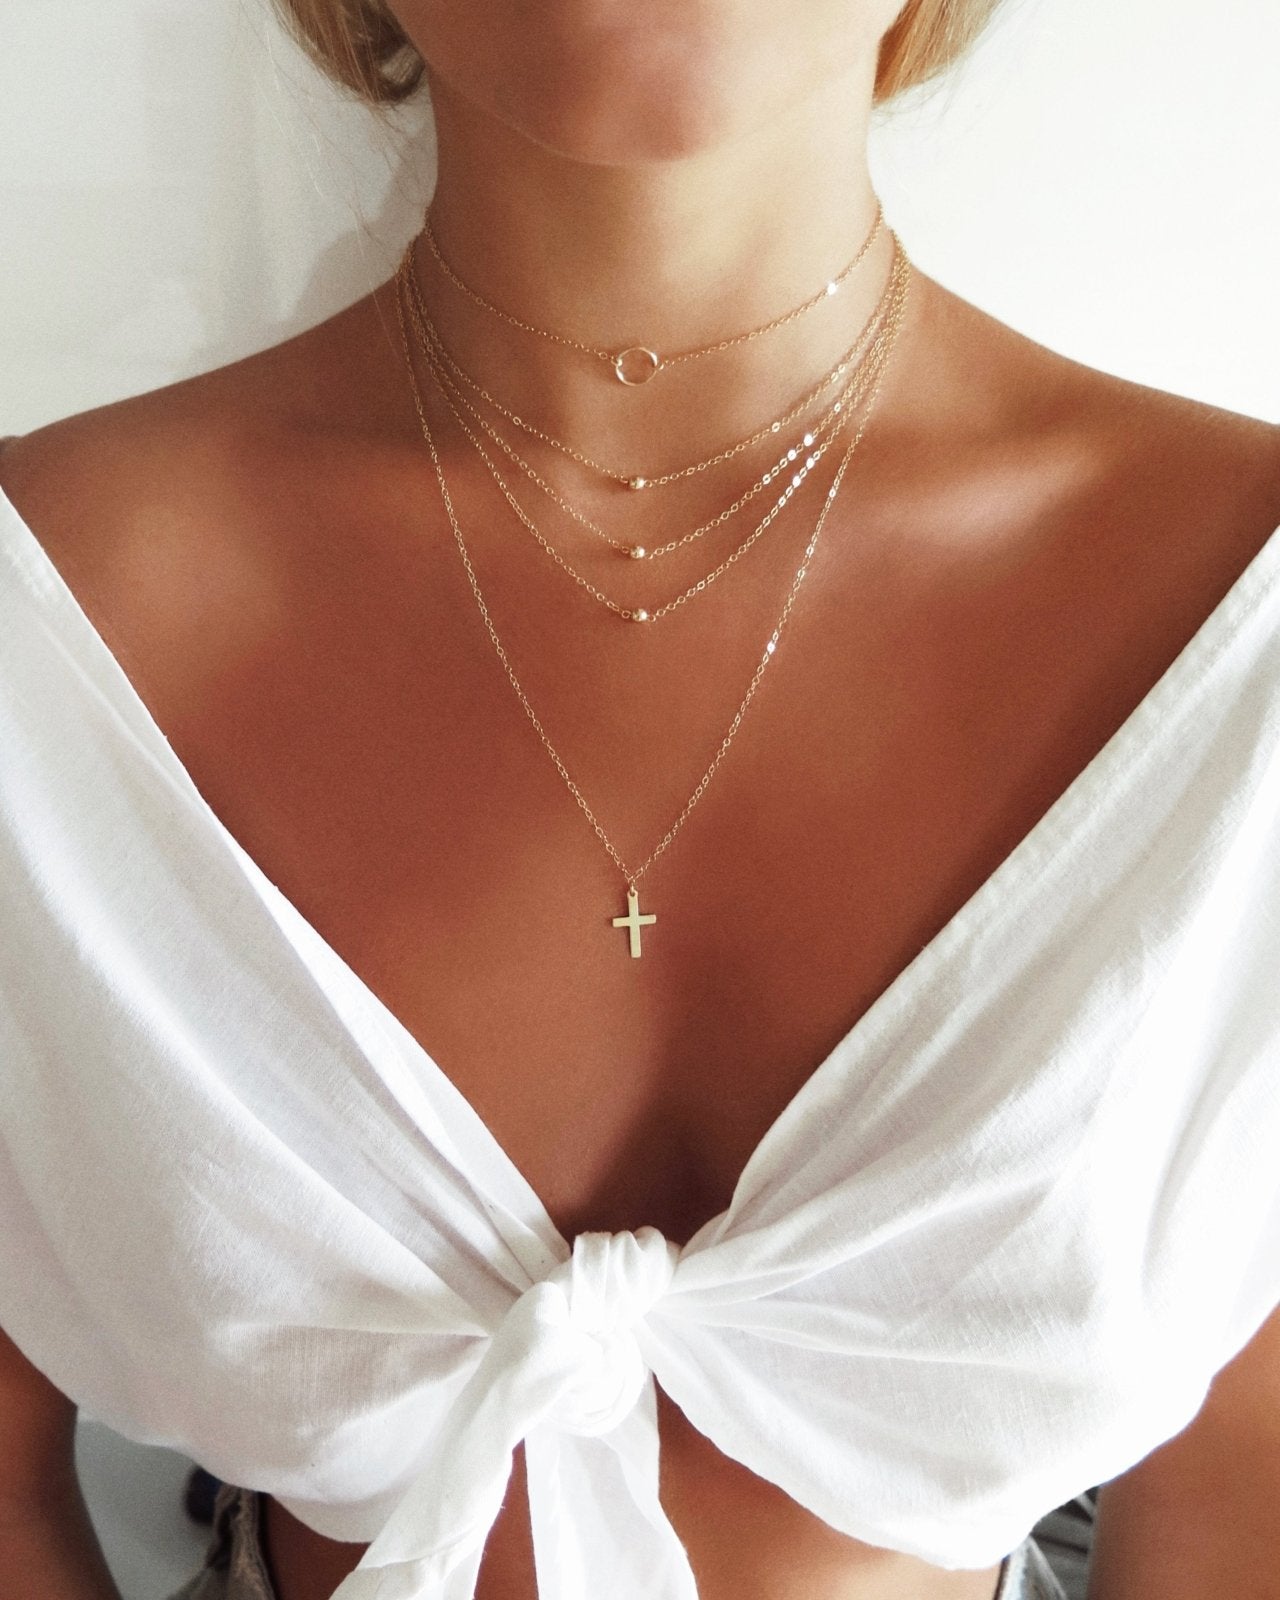 Load image into Gallery viewer, CROSS NECKLACE - The Littl - Deluxe Chain - 14k Yellow Gold Fill
